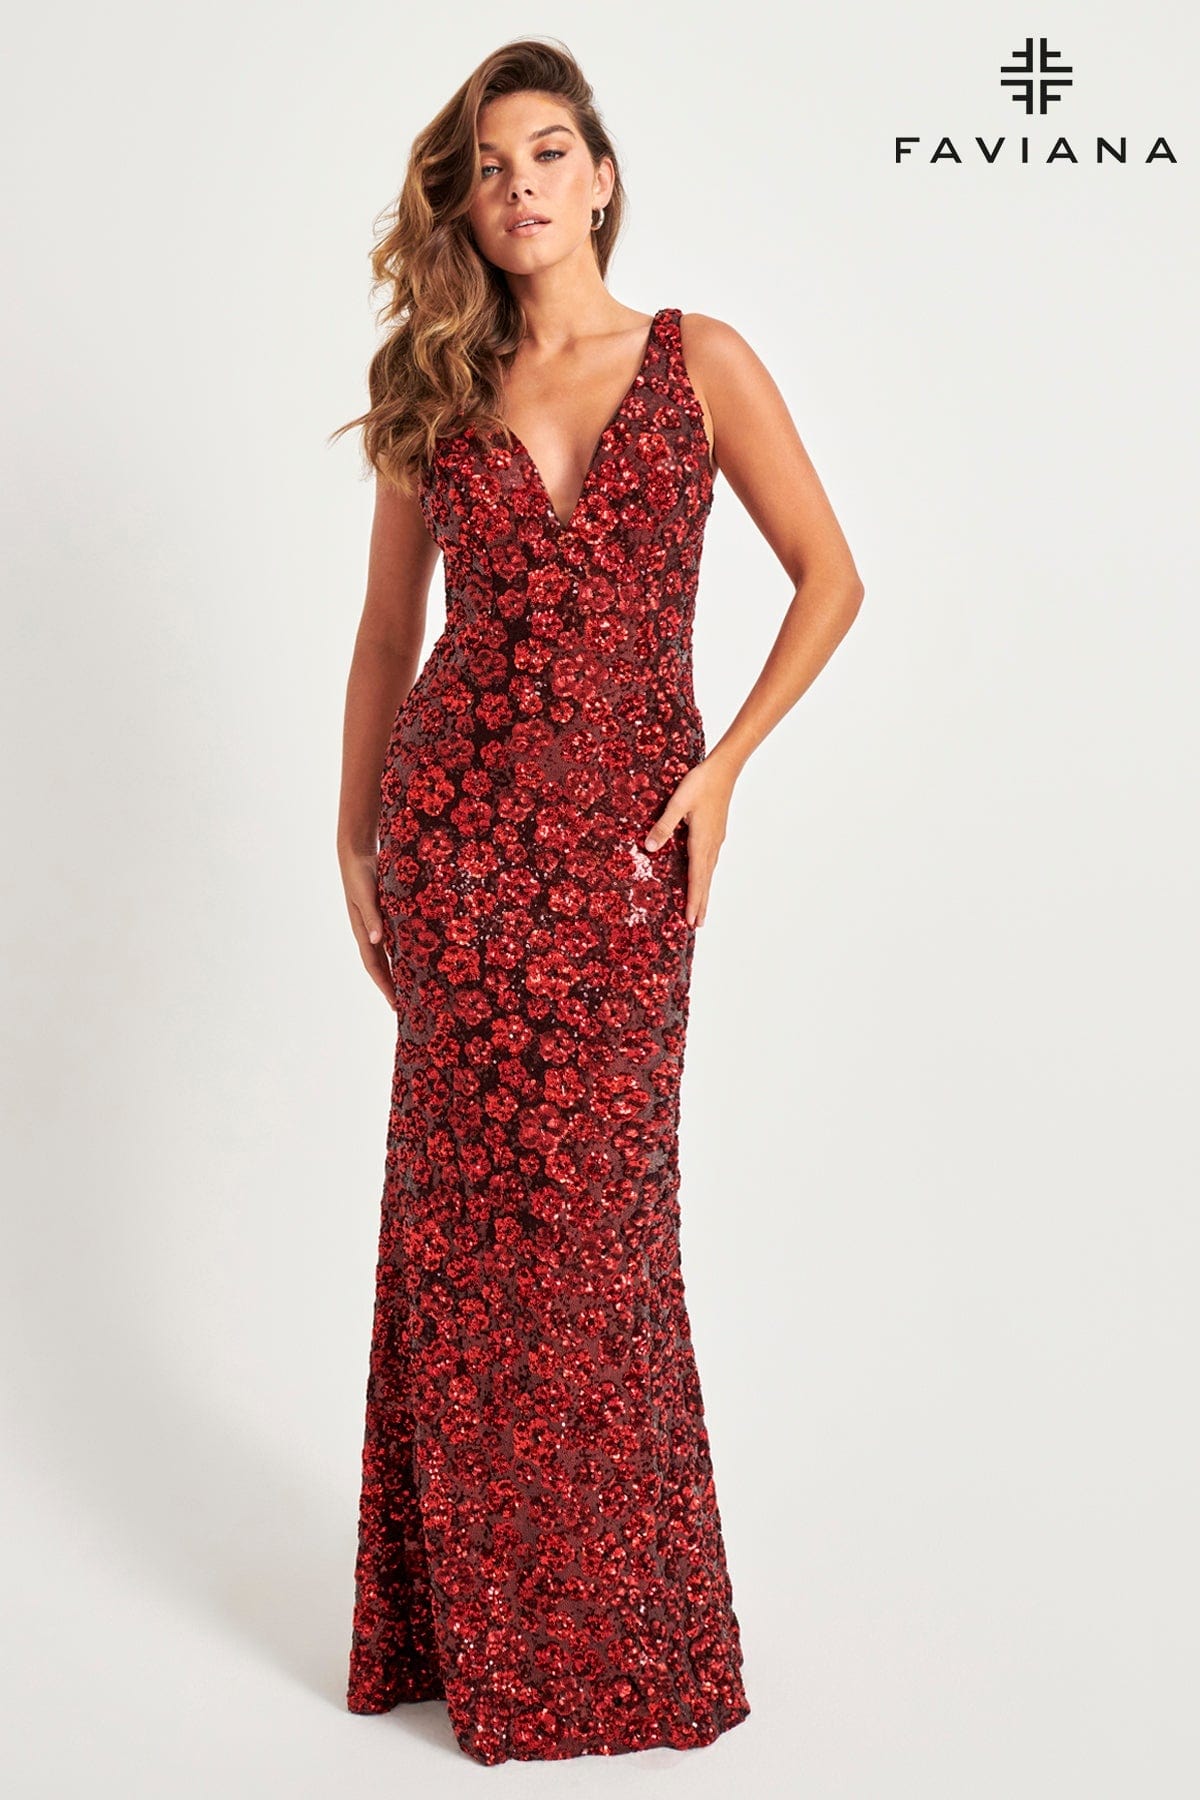 Red/Black Dress for Prom